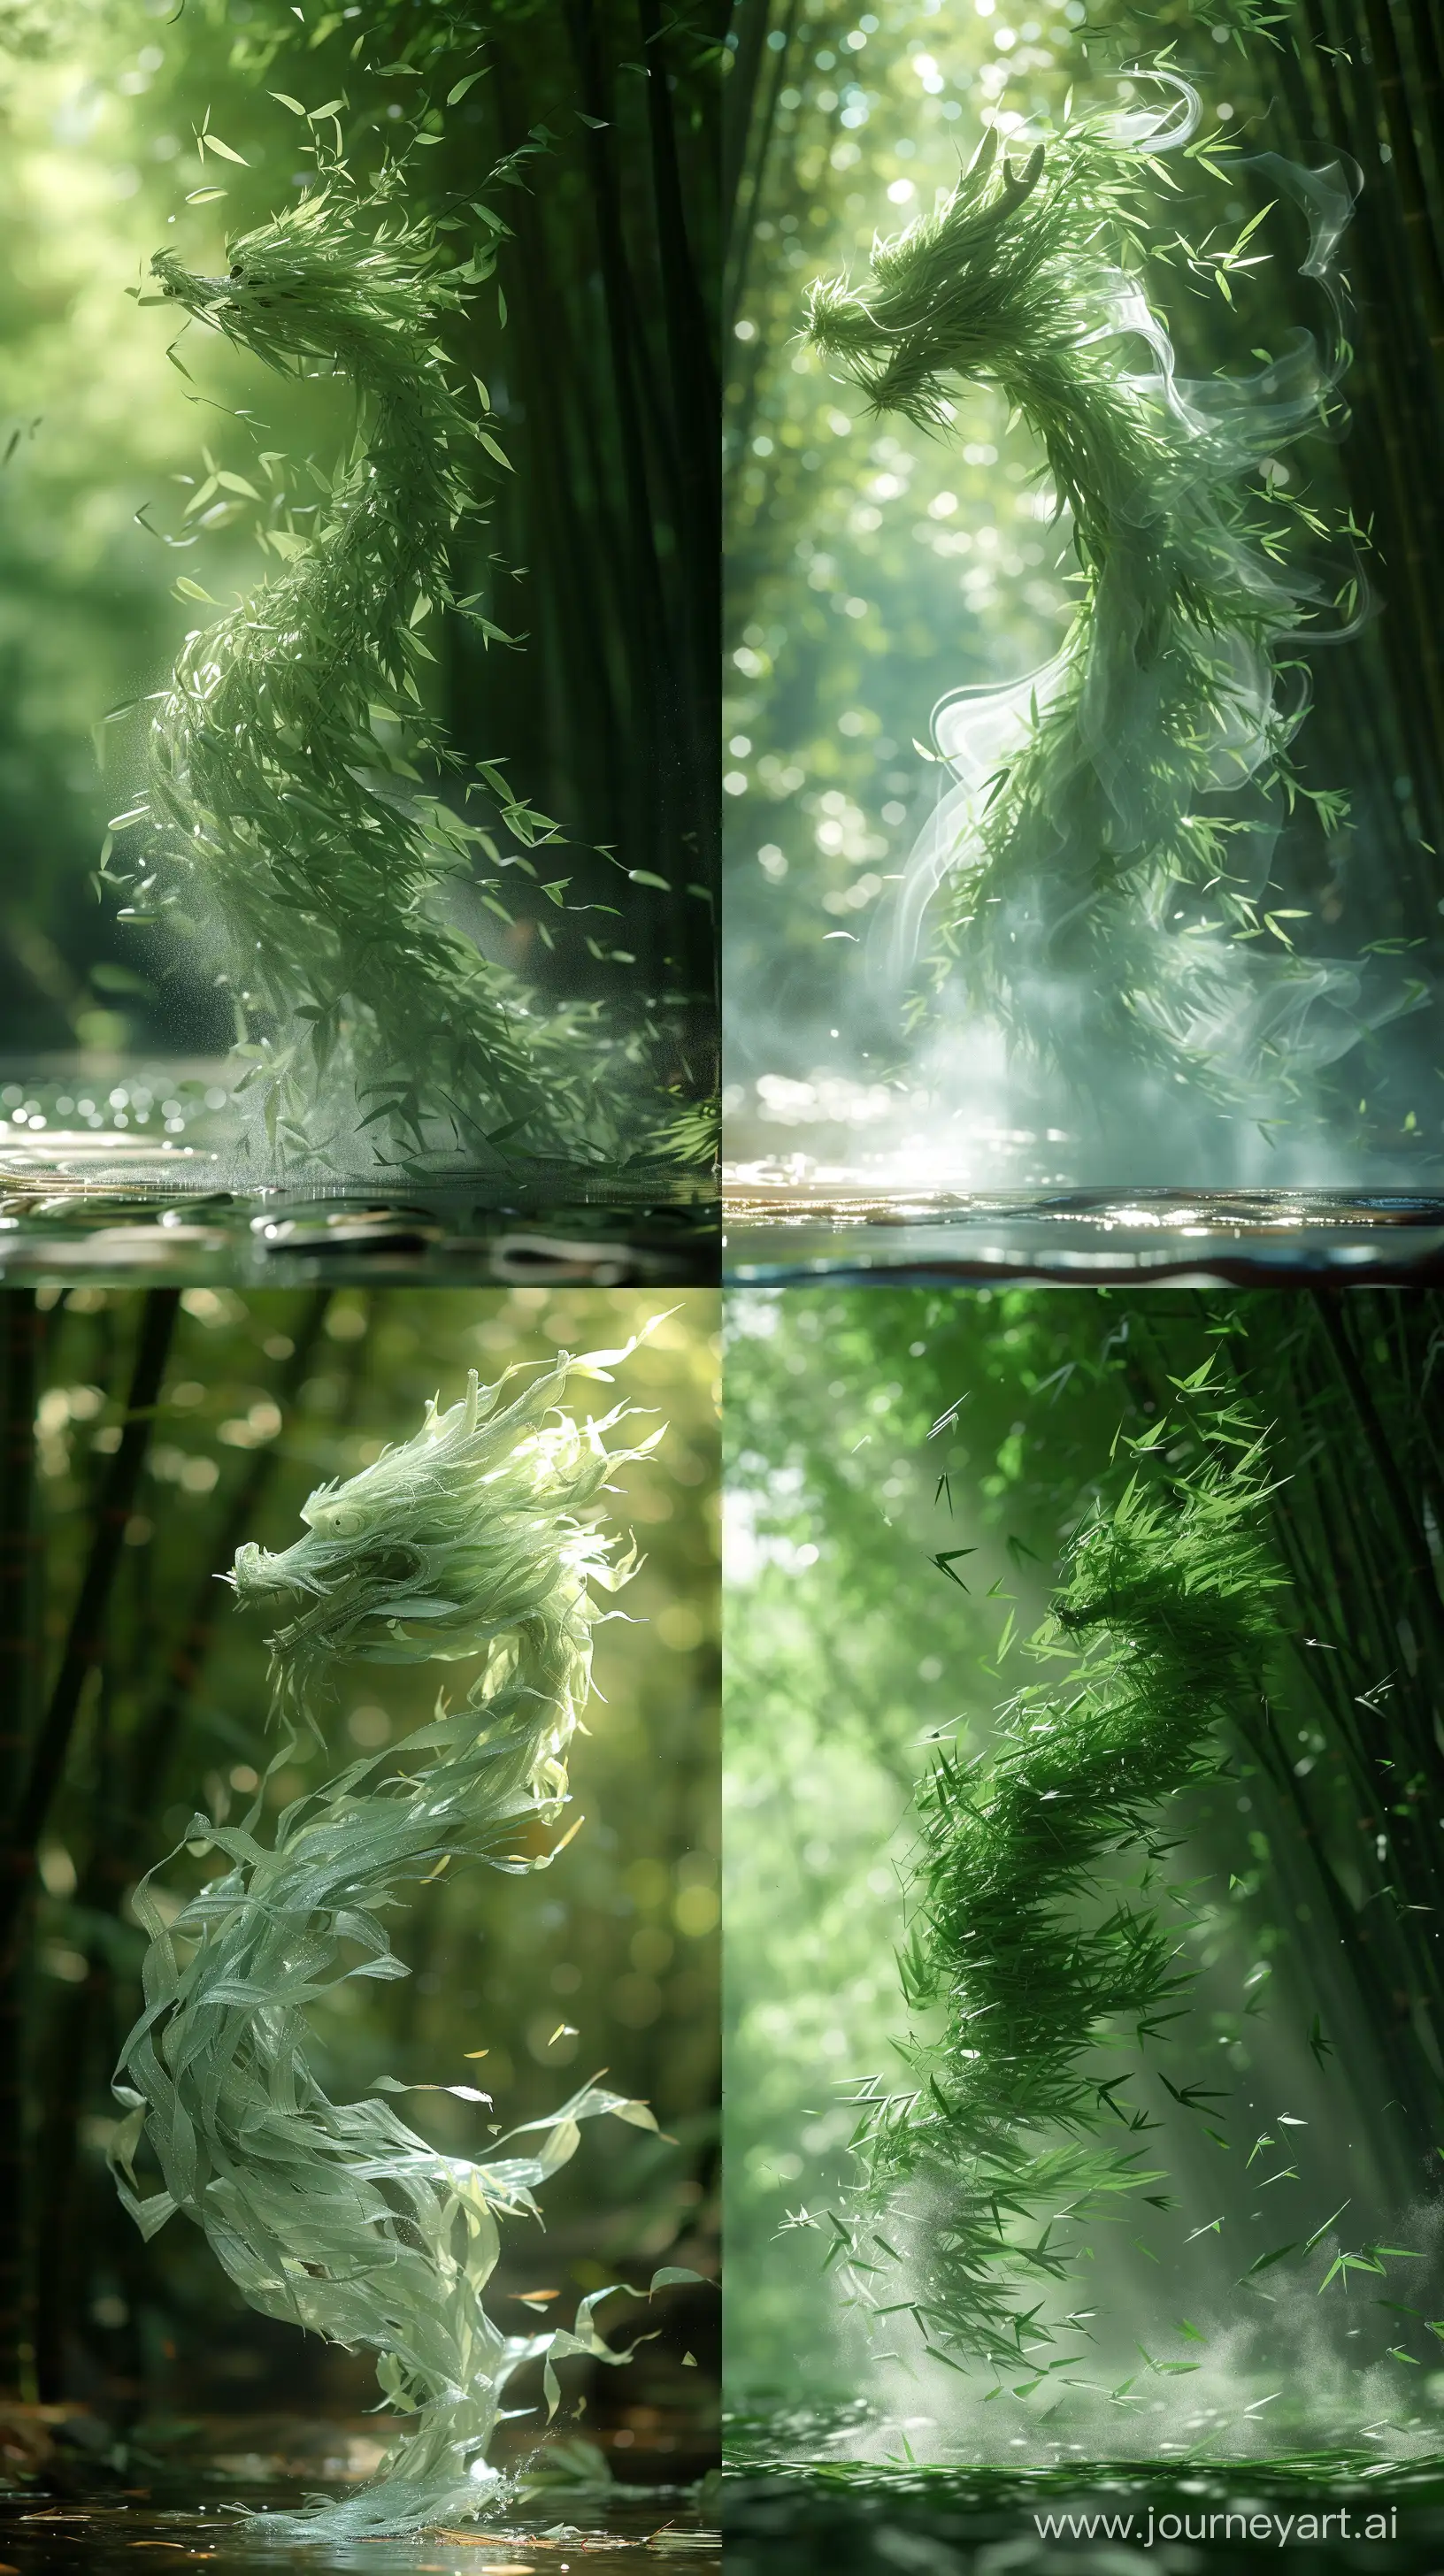 Ethereal-Chinese-Dragon-Emerges-from-Dancing-Bamboo-Leaves-in-Lush-Forest